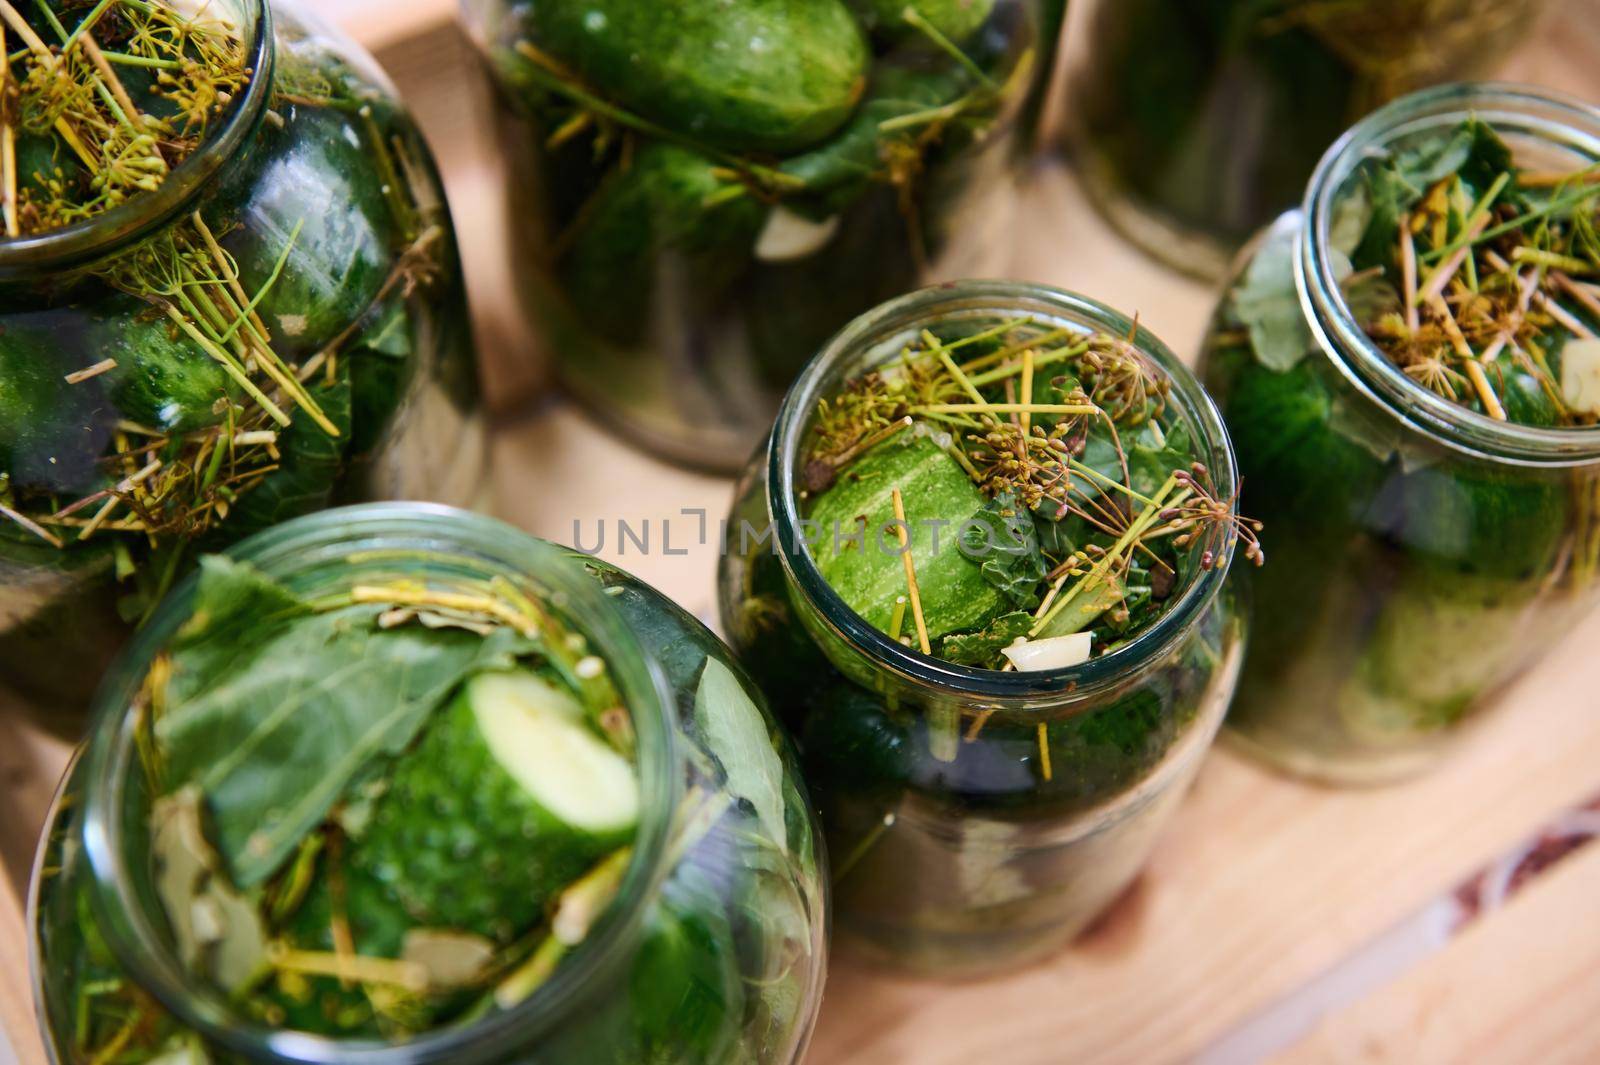 Preservations, conservation. Salted, pickled marinated cucumbers with herbs, dill and garlic in a jar on an rustic wooden crate. Canning food for the winter. Autumn pickling and canning of vegetables.